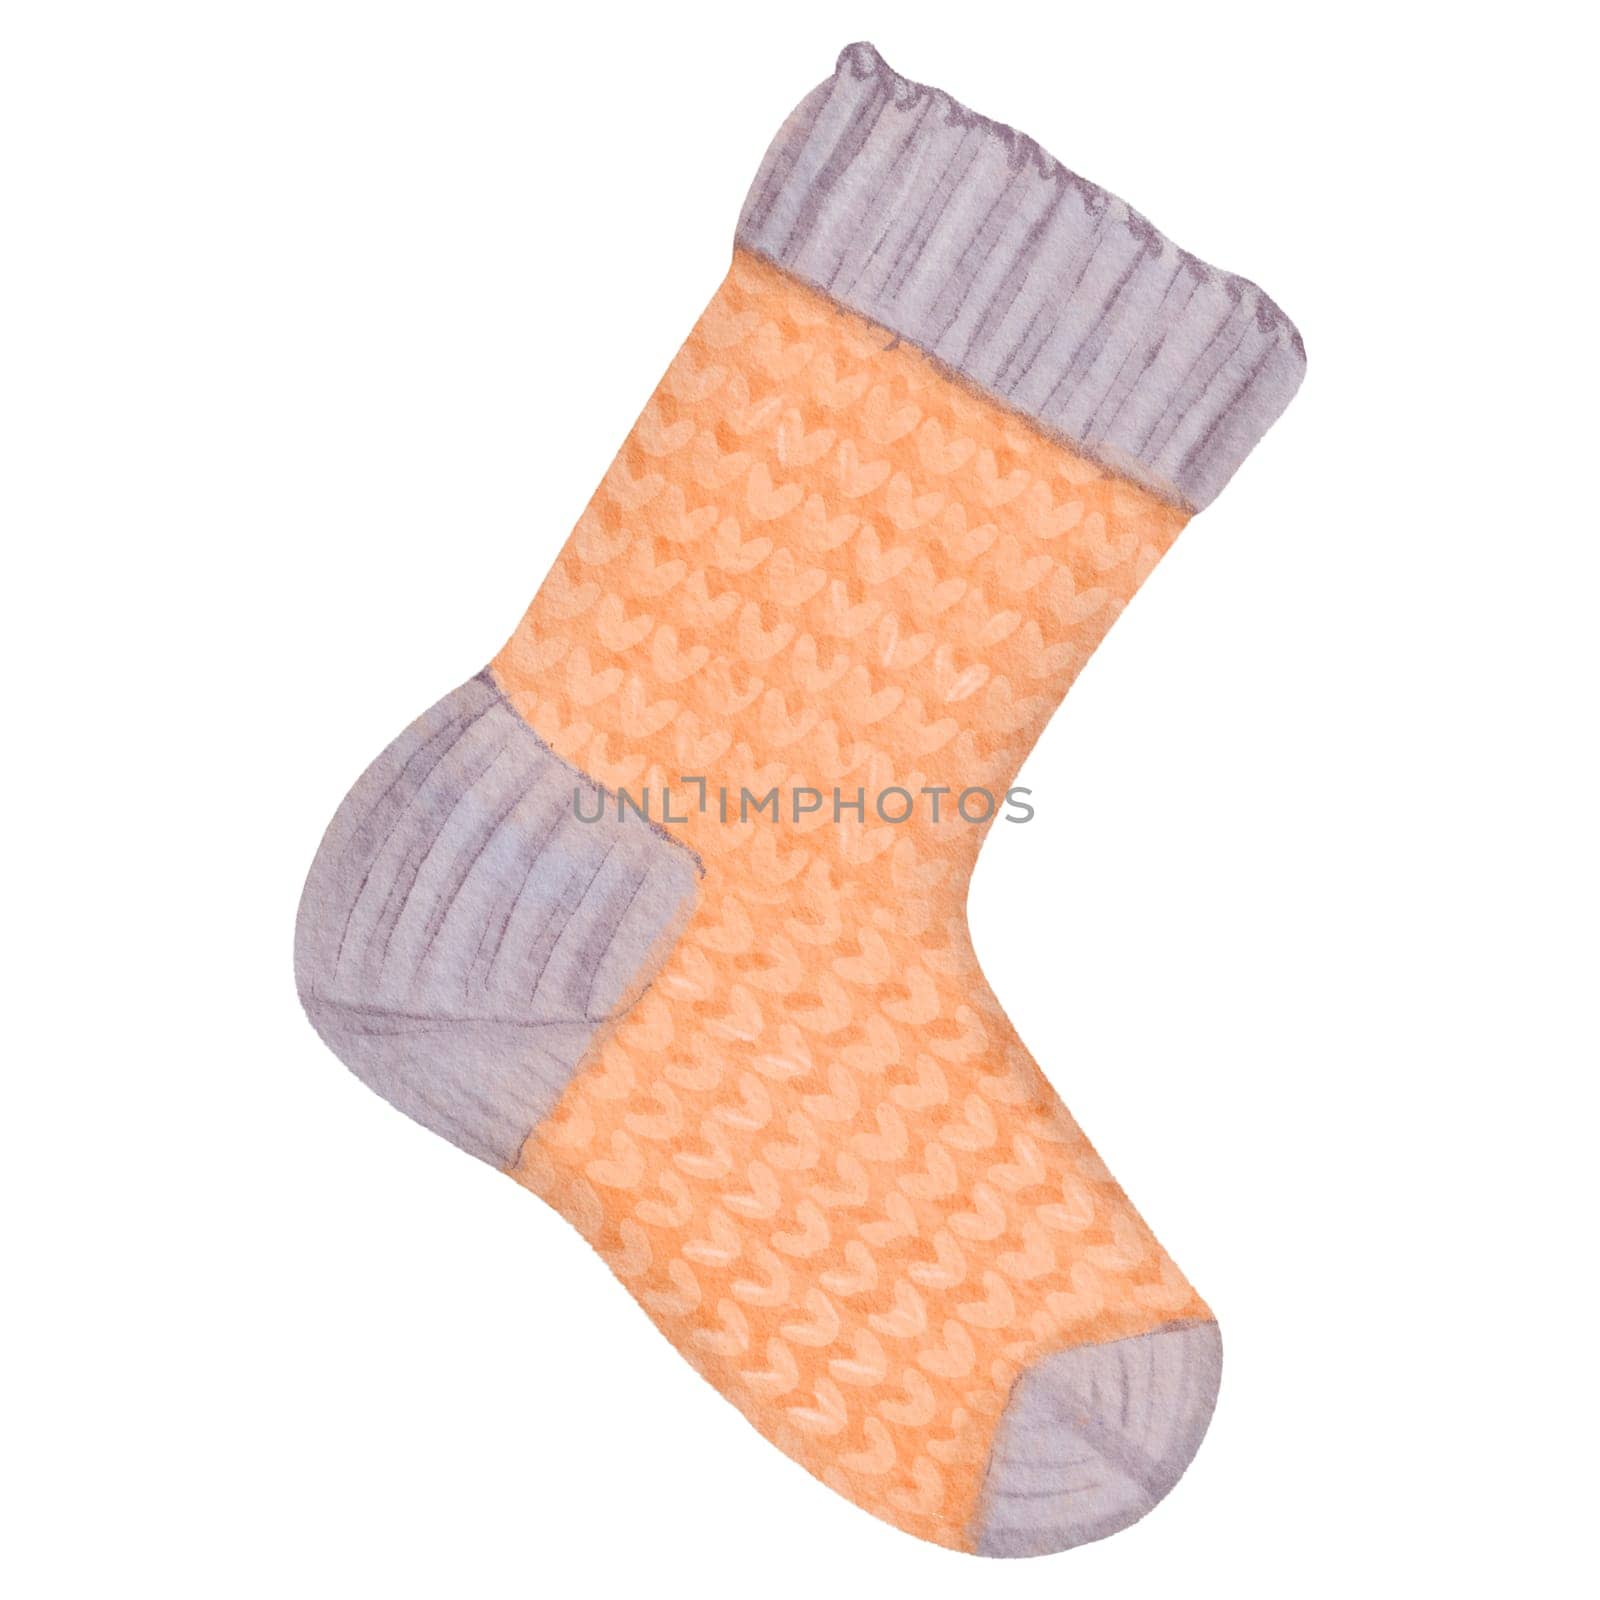 A watercolor isolated object featuring a knitted sock, a clothing item for winter and autumn. Suitable for knitting, crafting, and cozy evenings by Art_Mari_Ka